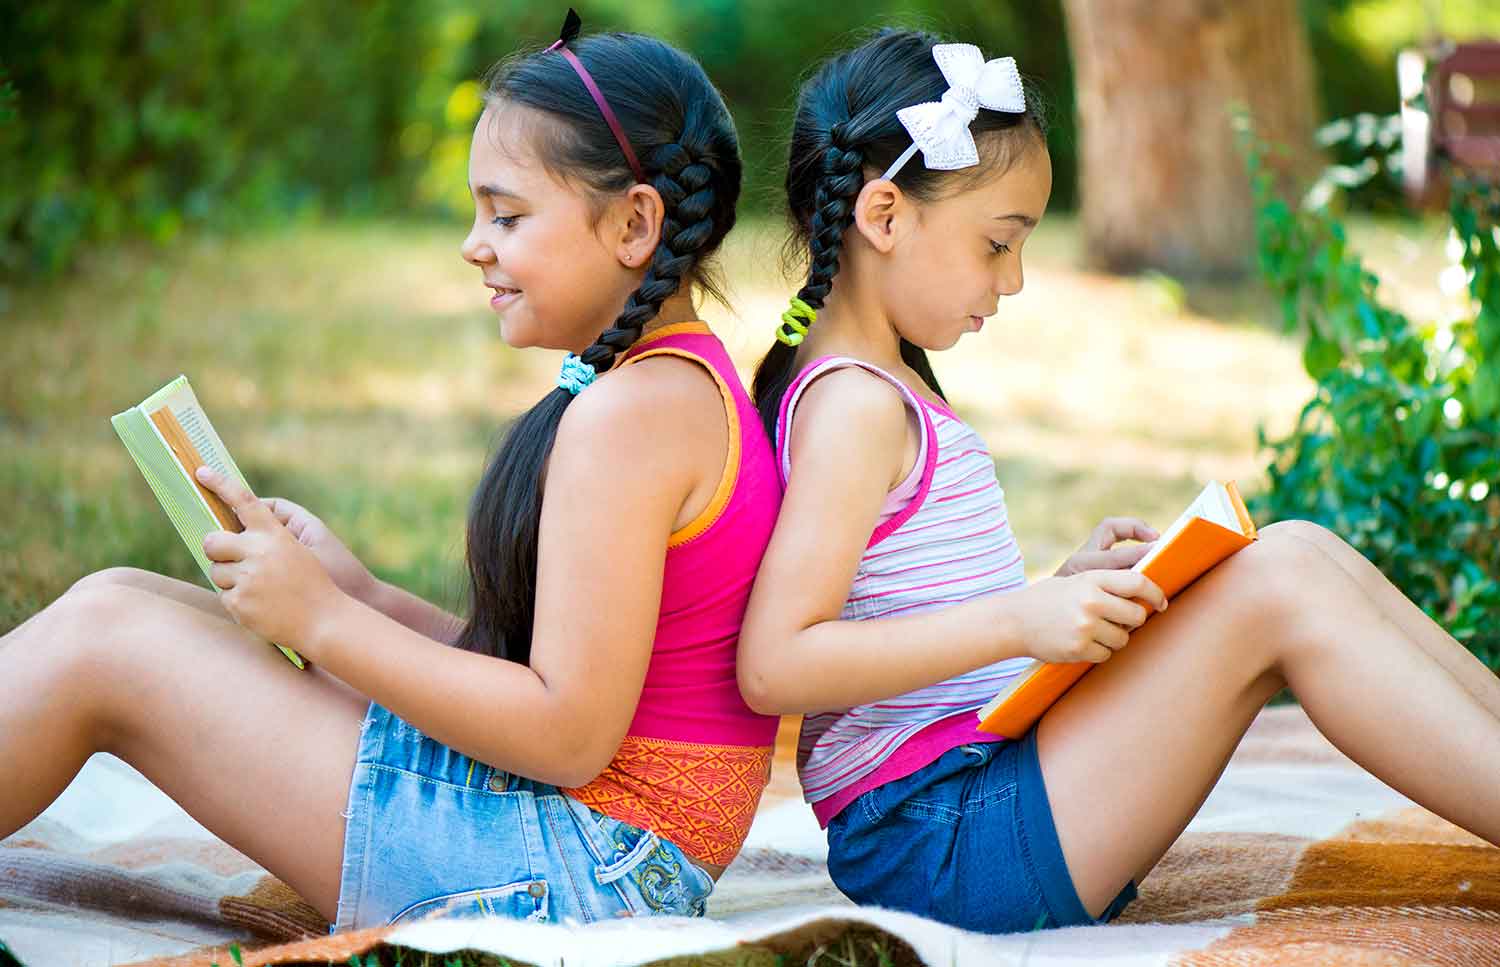 Two girls sit back to back on a blanket outdoors reading books.